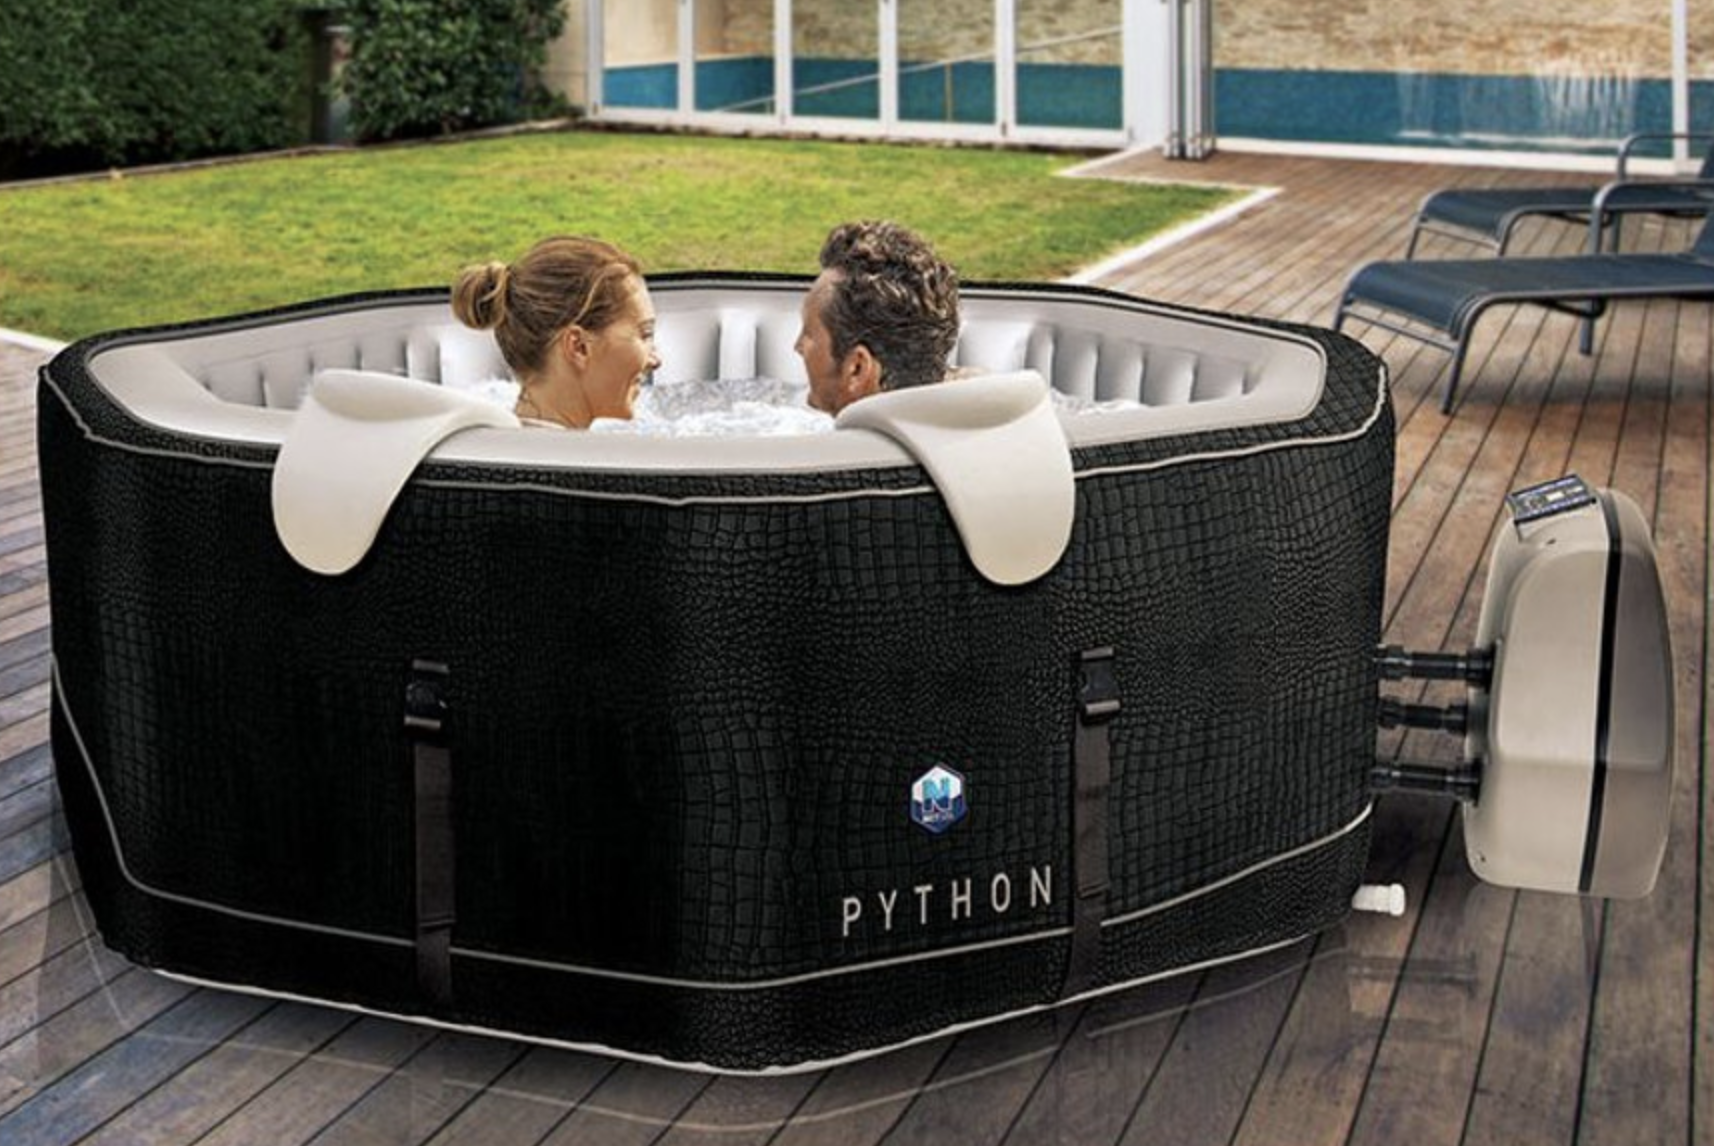 Spa gonflable Python octogonal Bulles 5-6 places Netspa 